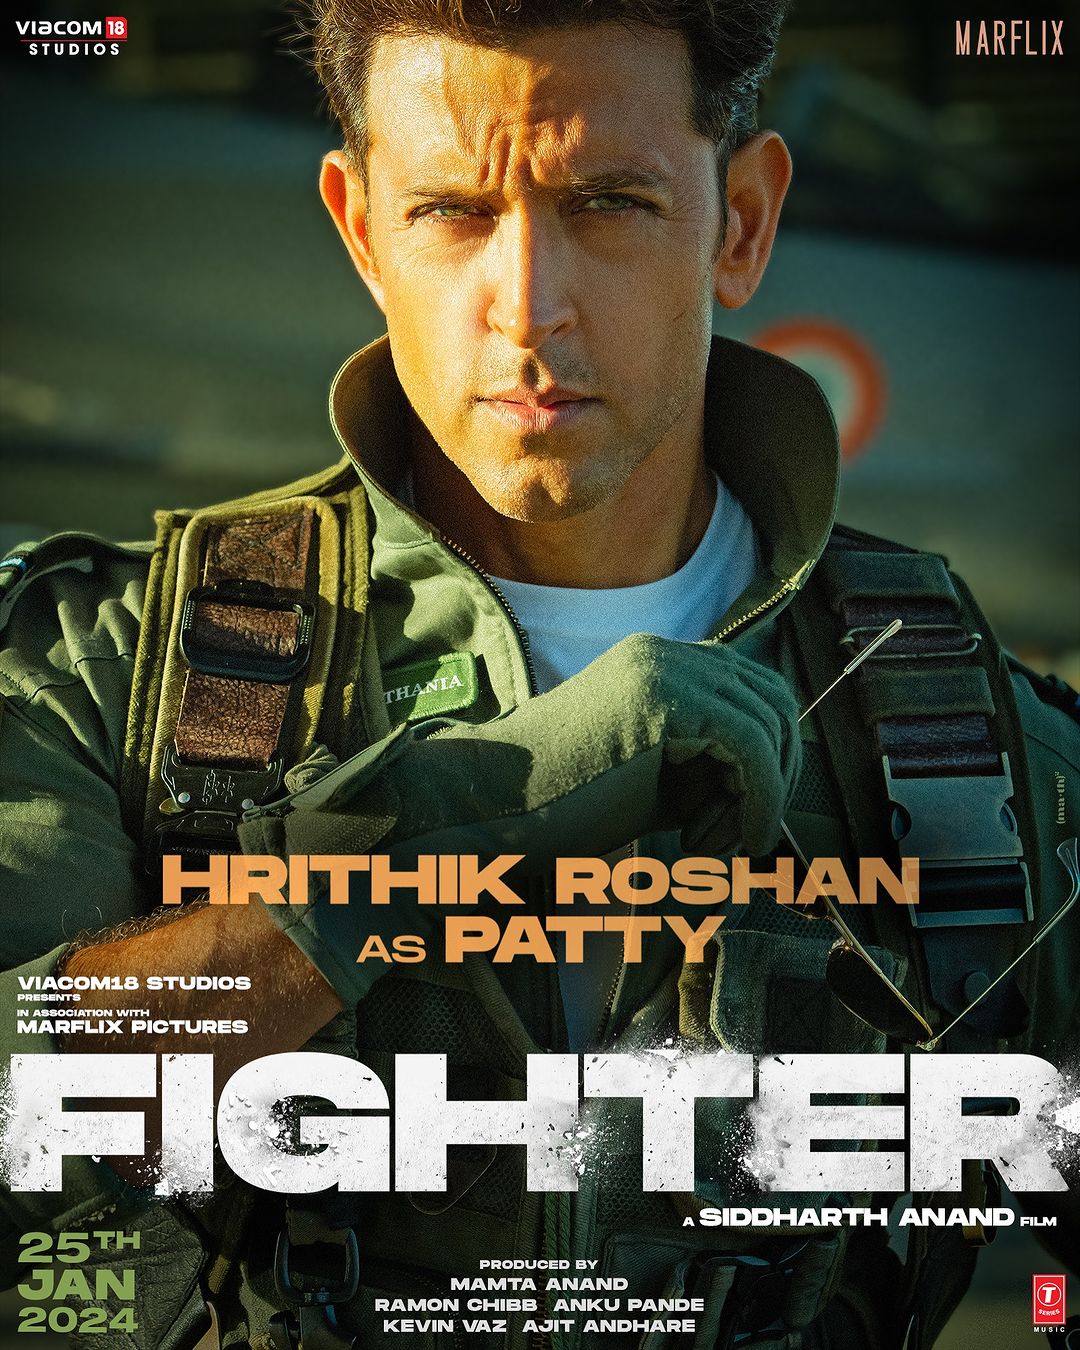 Fighter Movie (2024) Cast & Crew, Release Date, Story, Budget